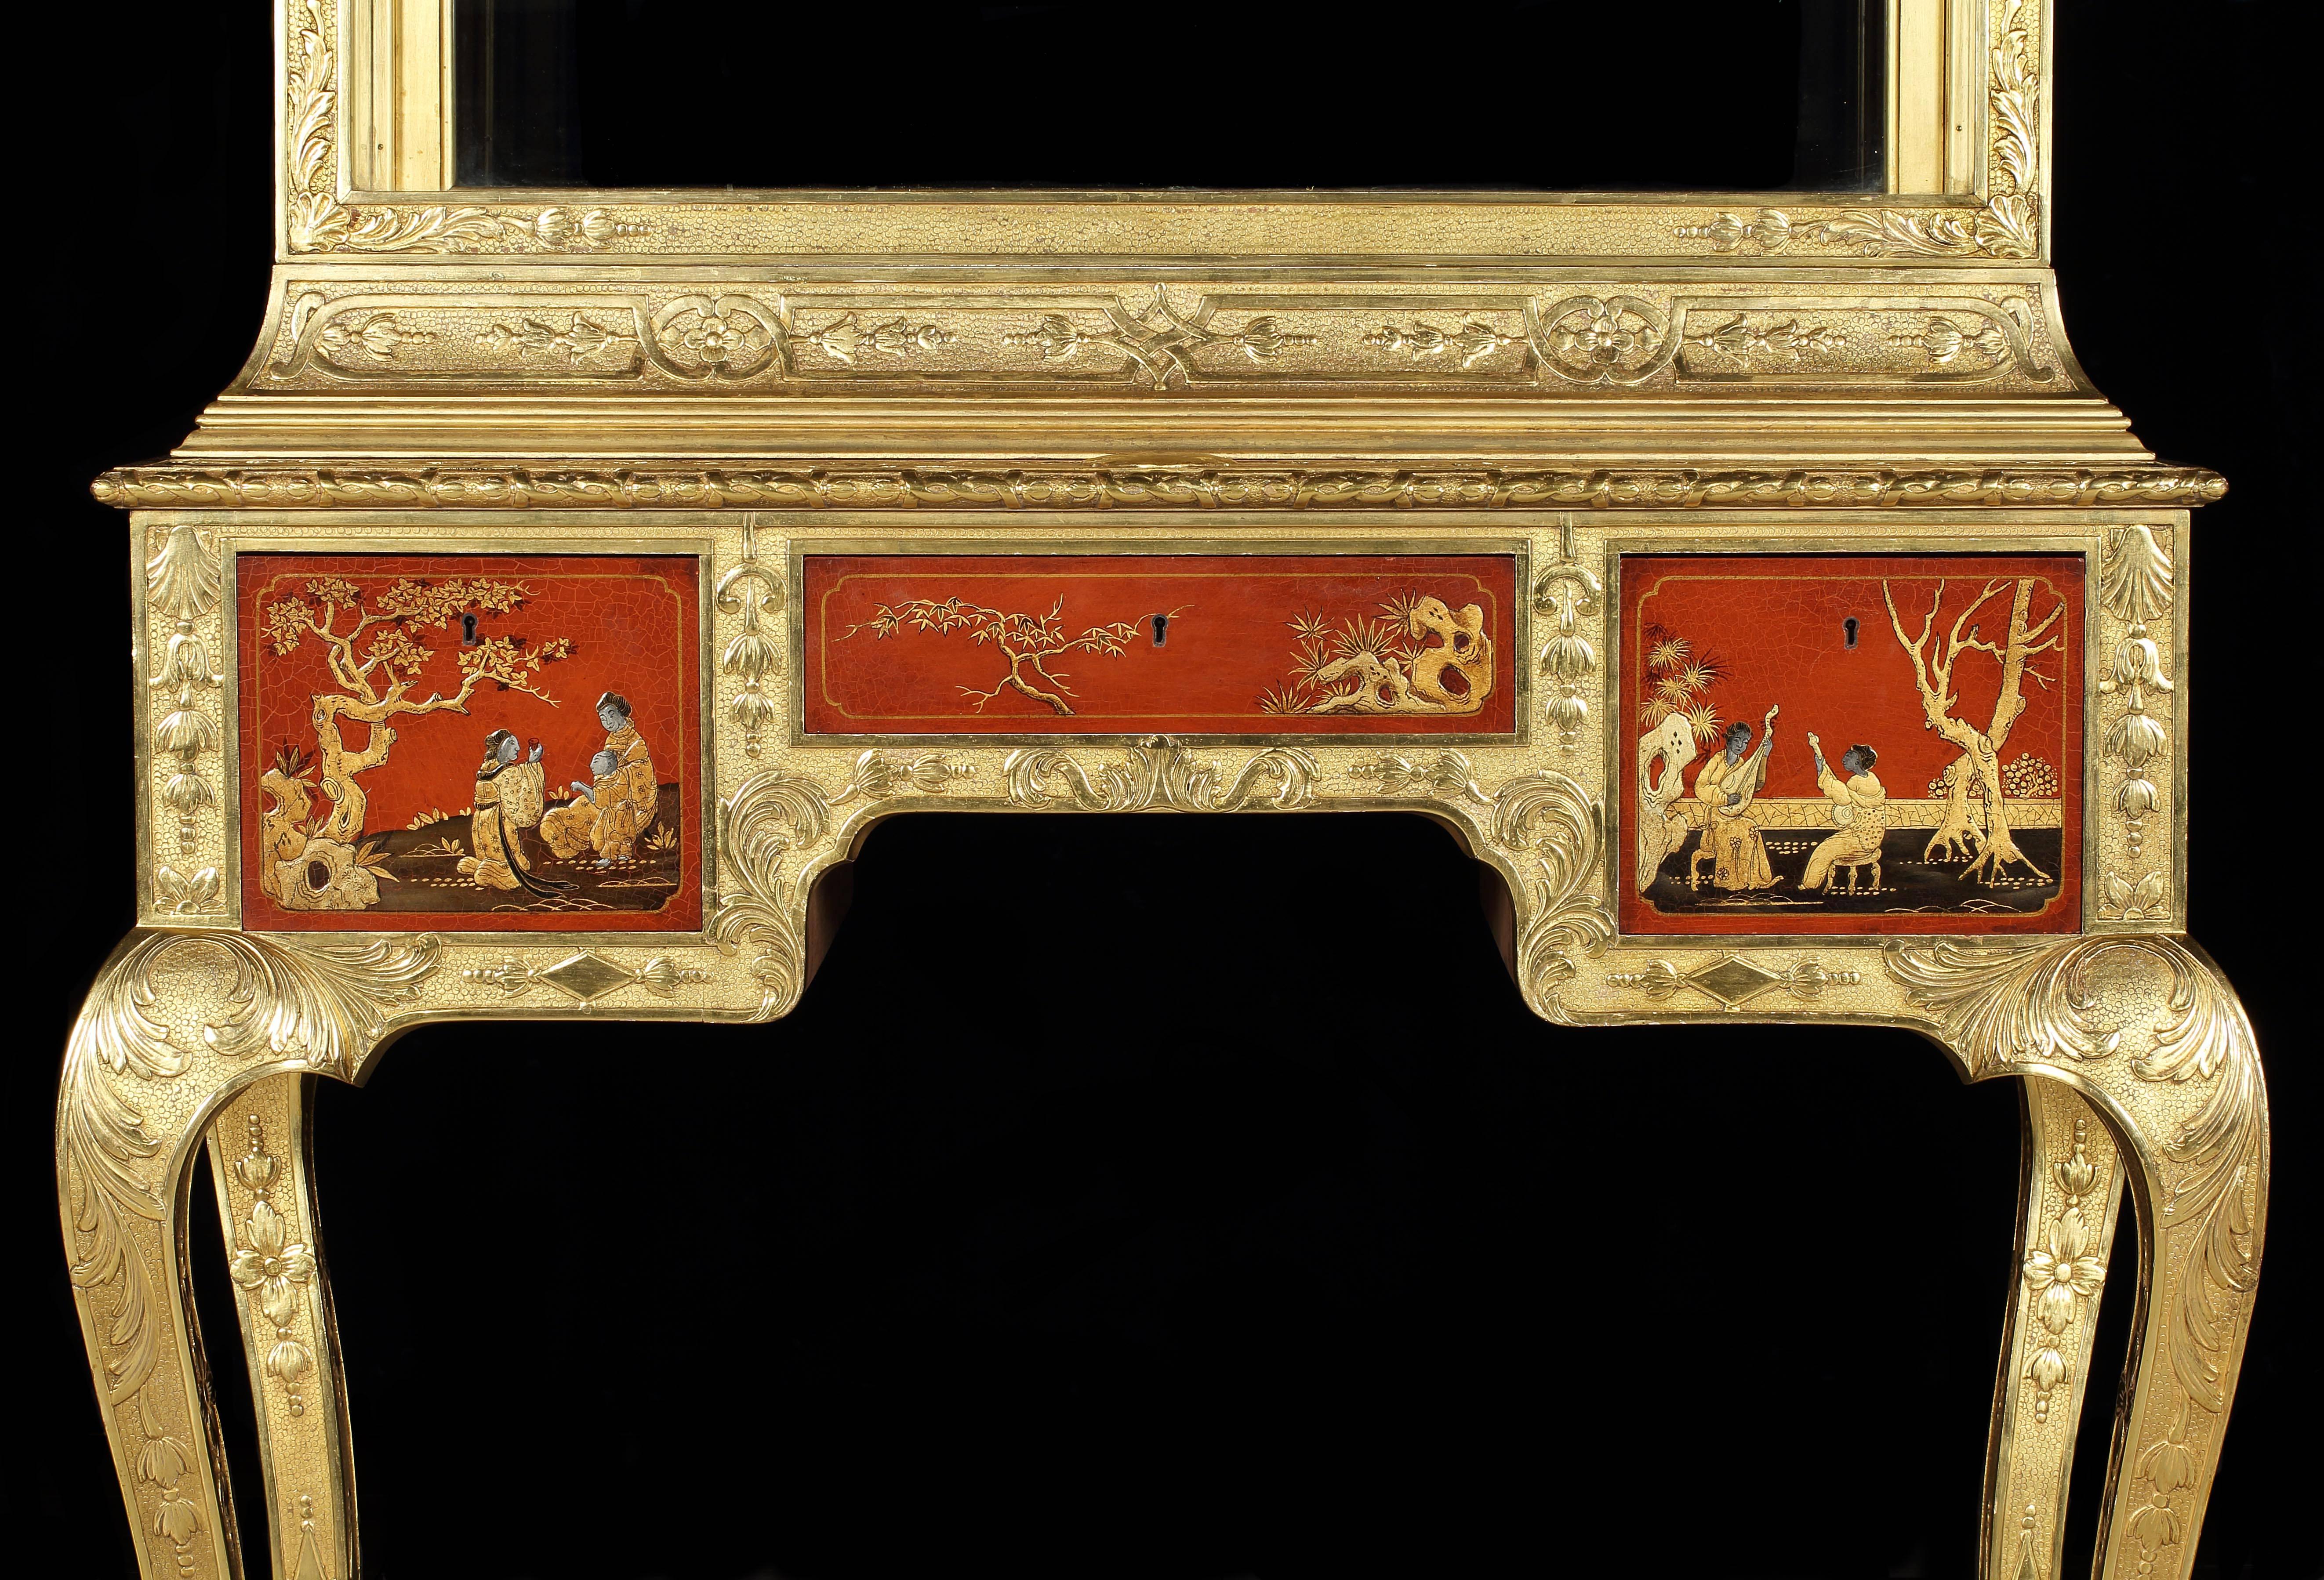 A pair of display vitrines in the early Georgian manner probably by Lengyon and Morant

Constructed in gilt and gesso work decorated with entrelacs, strapwork, scallop shells and acanthi; partially japanned; each rising from four cabriole trifid